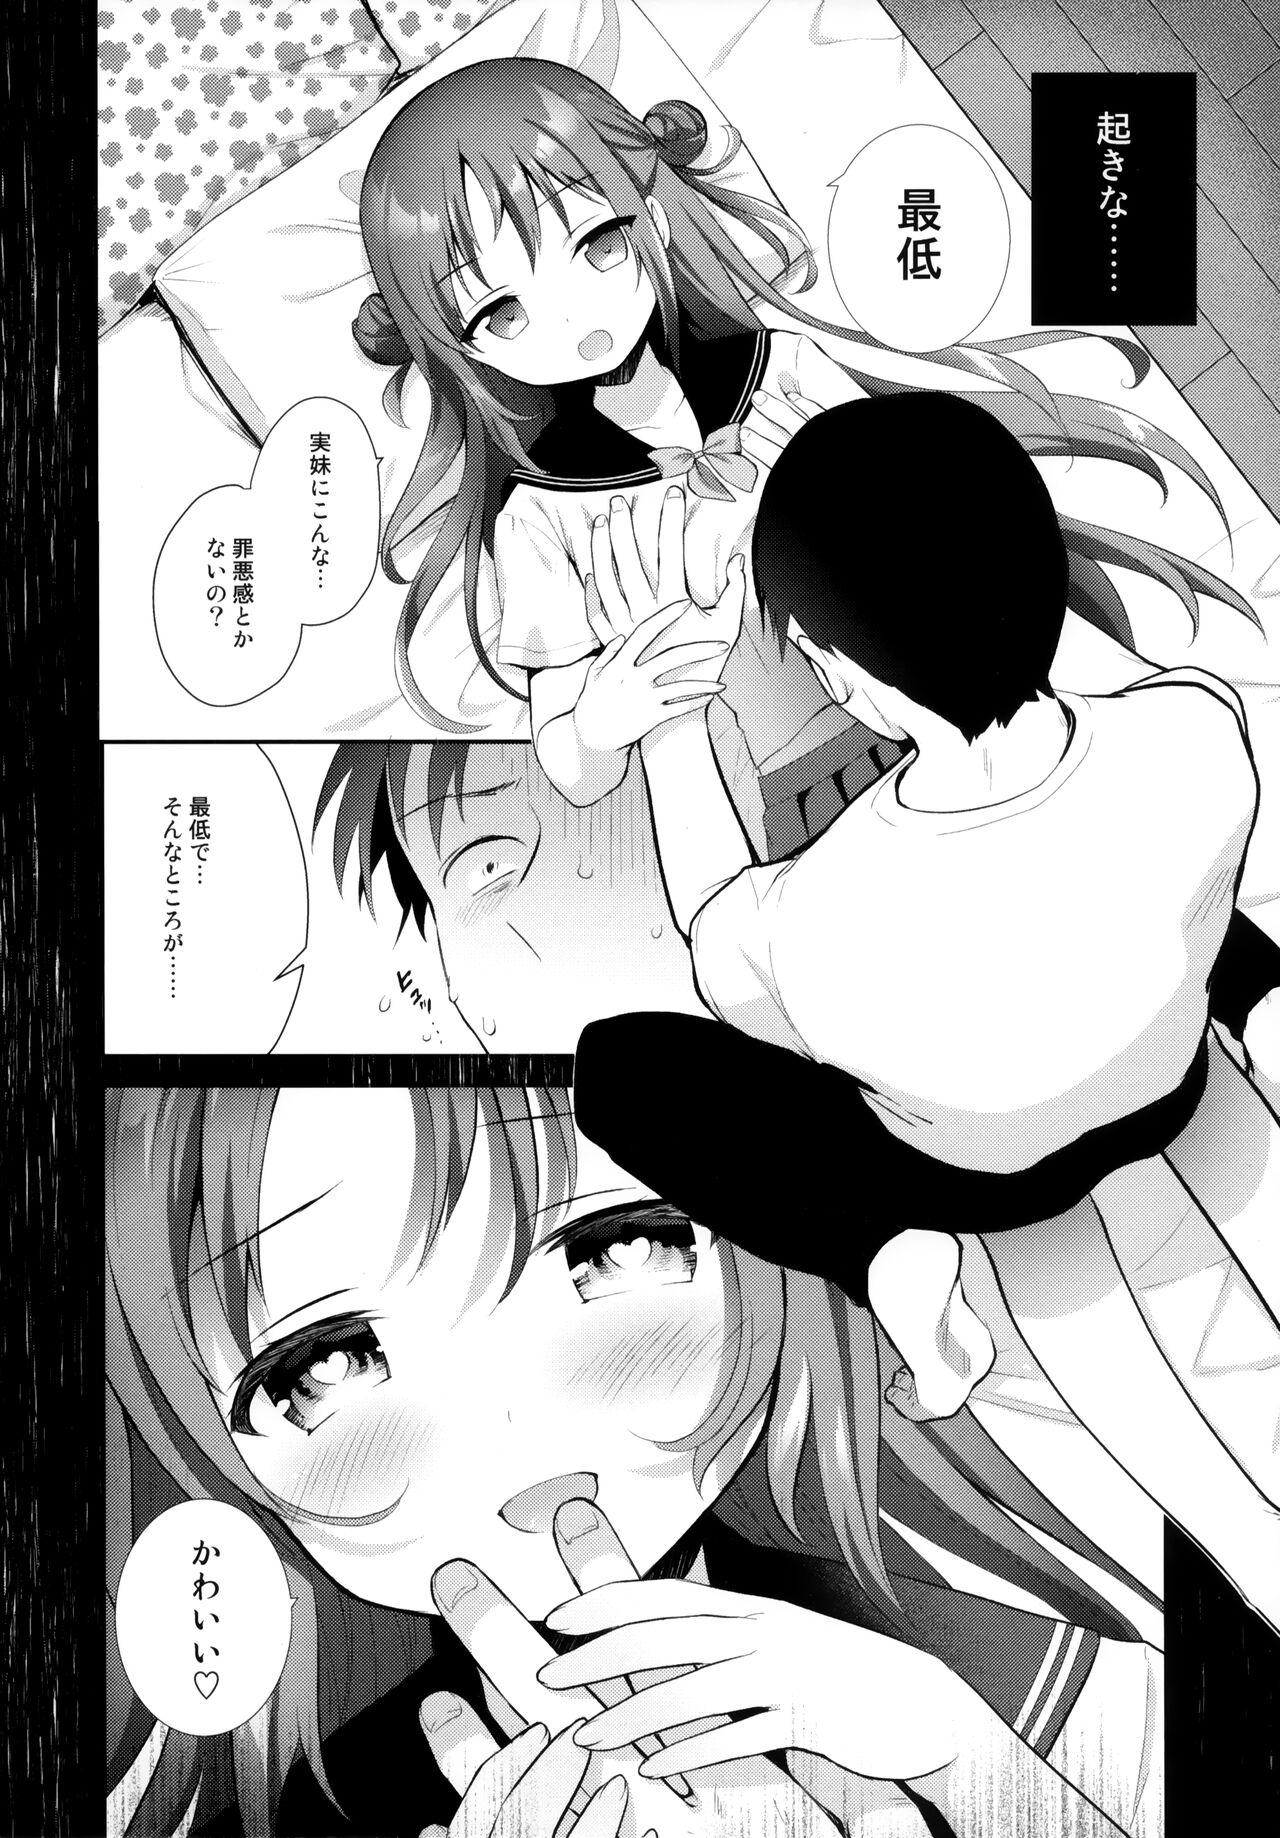 Perfect Butt Oyasumi, Onii-chan - Original Dick - Page 3